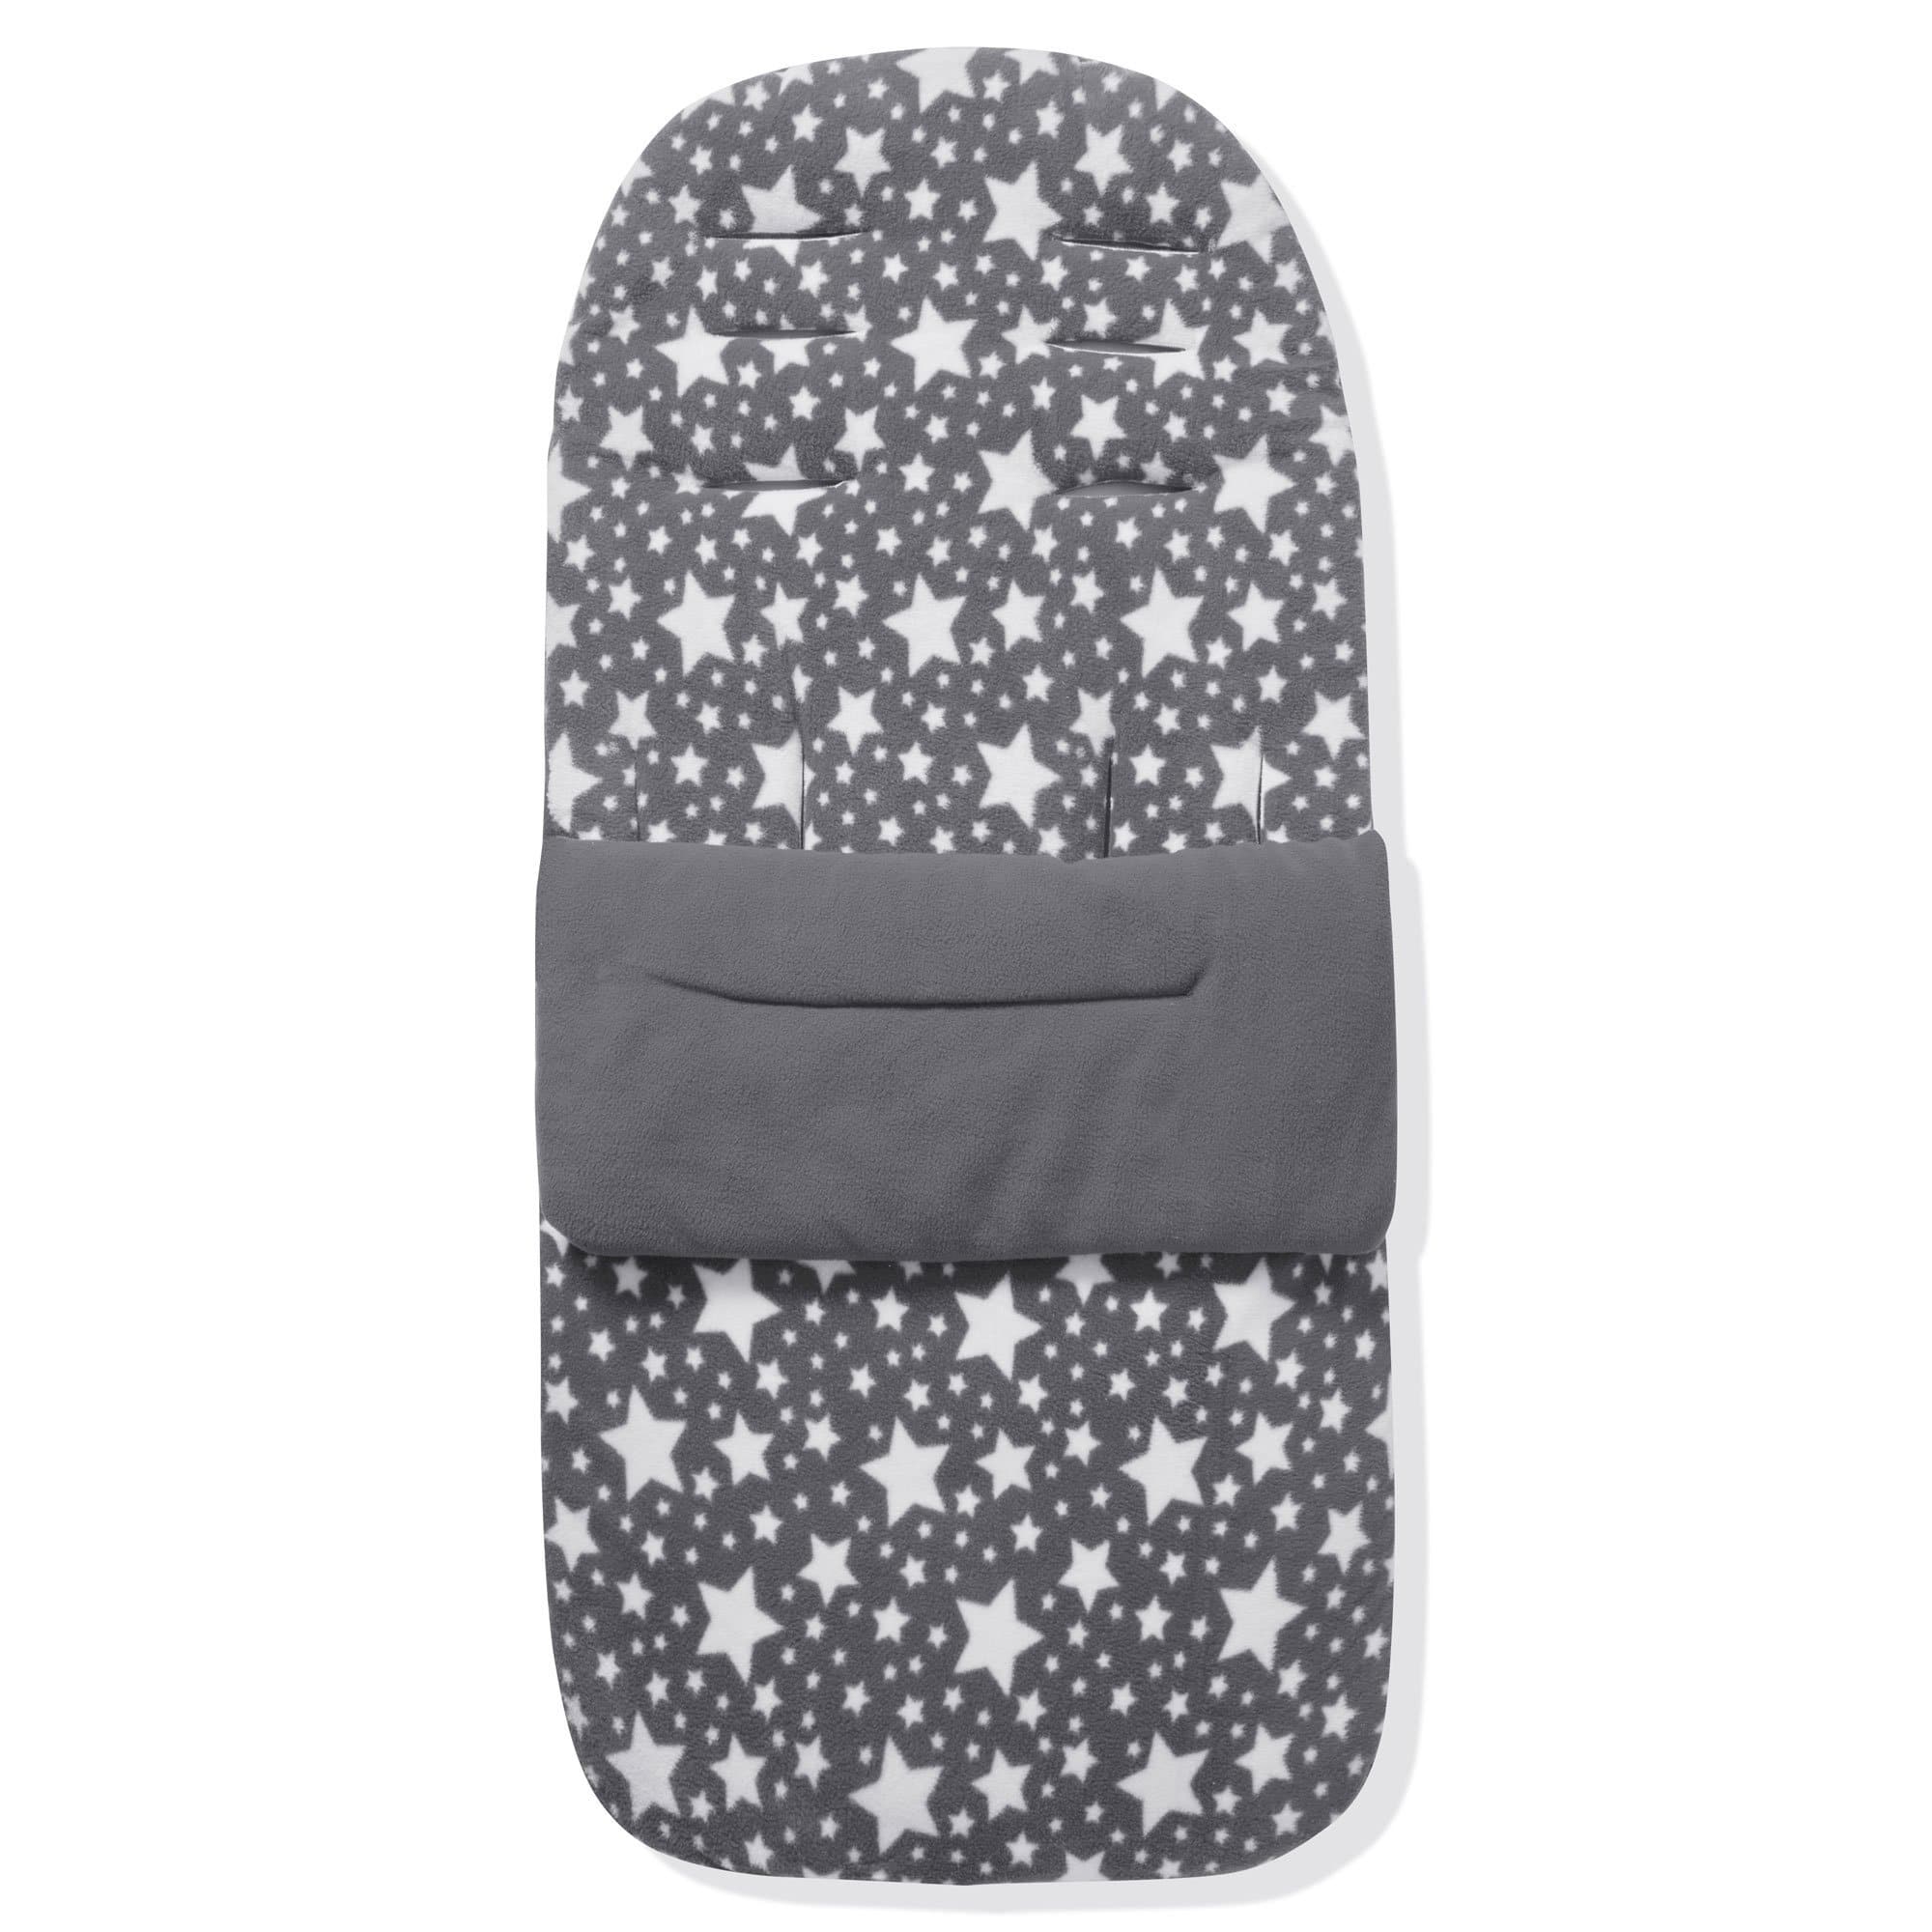 Fleece Footmuff / Cosy Toes Compatible with Petite - Grey Star / Fits All Models | For Your Little One